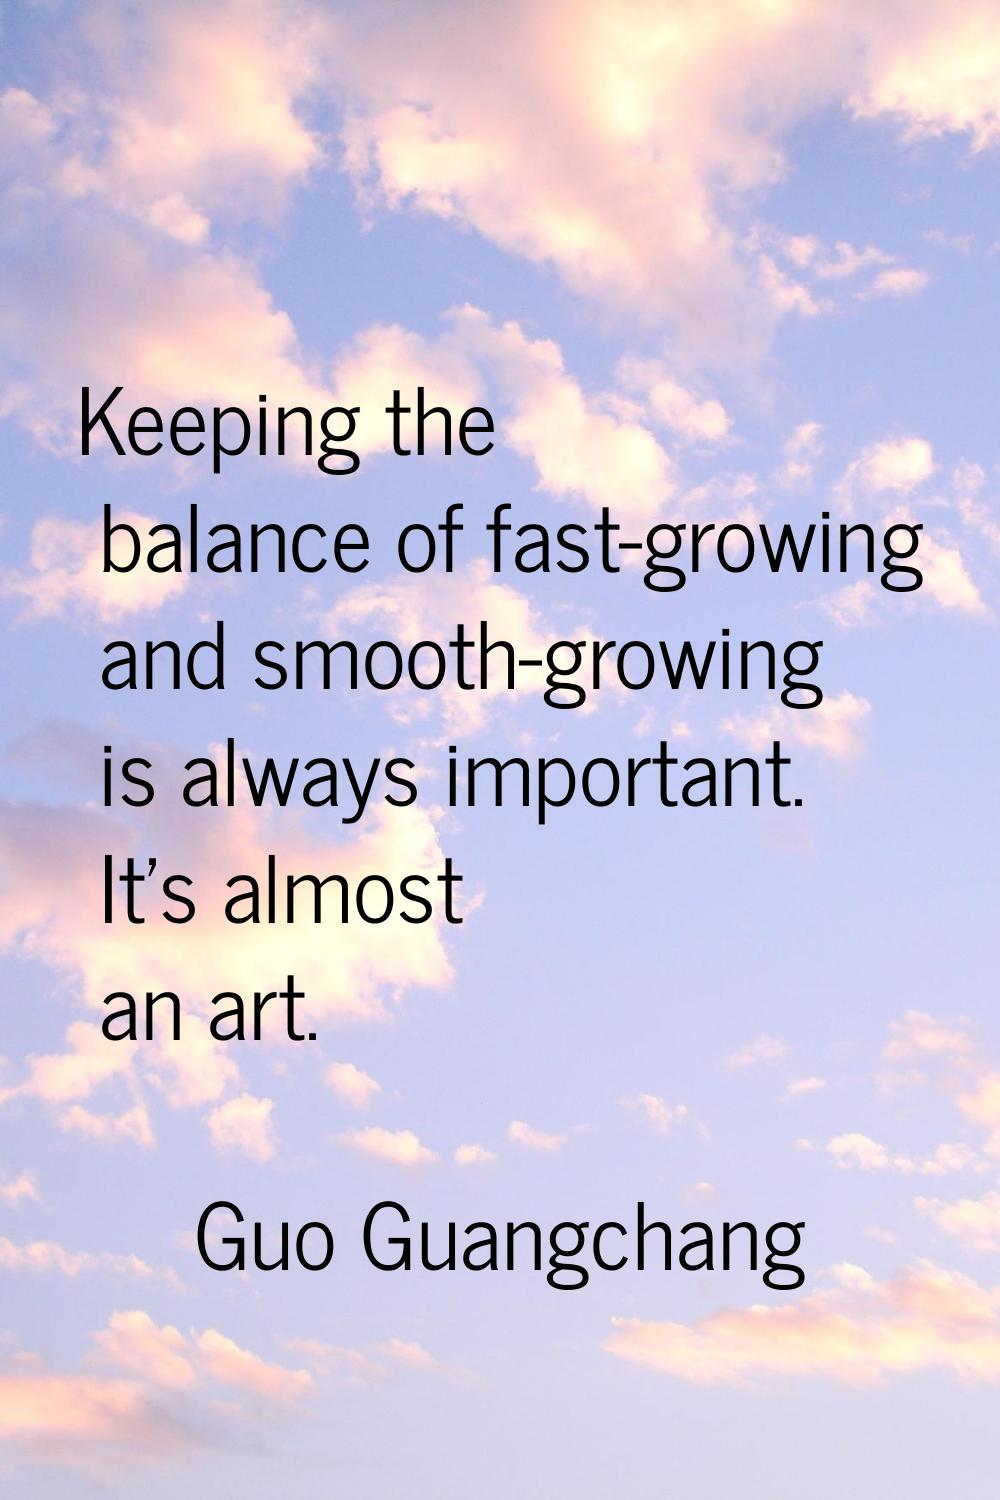 Keeping the balance of fast-growing and smooth-growing is always important. It's almost an art.